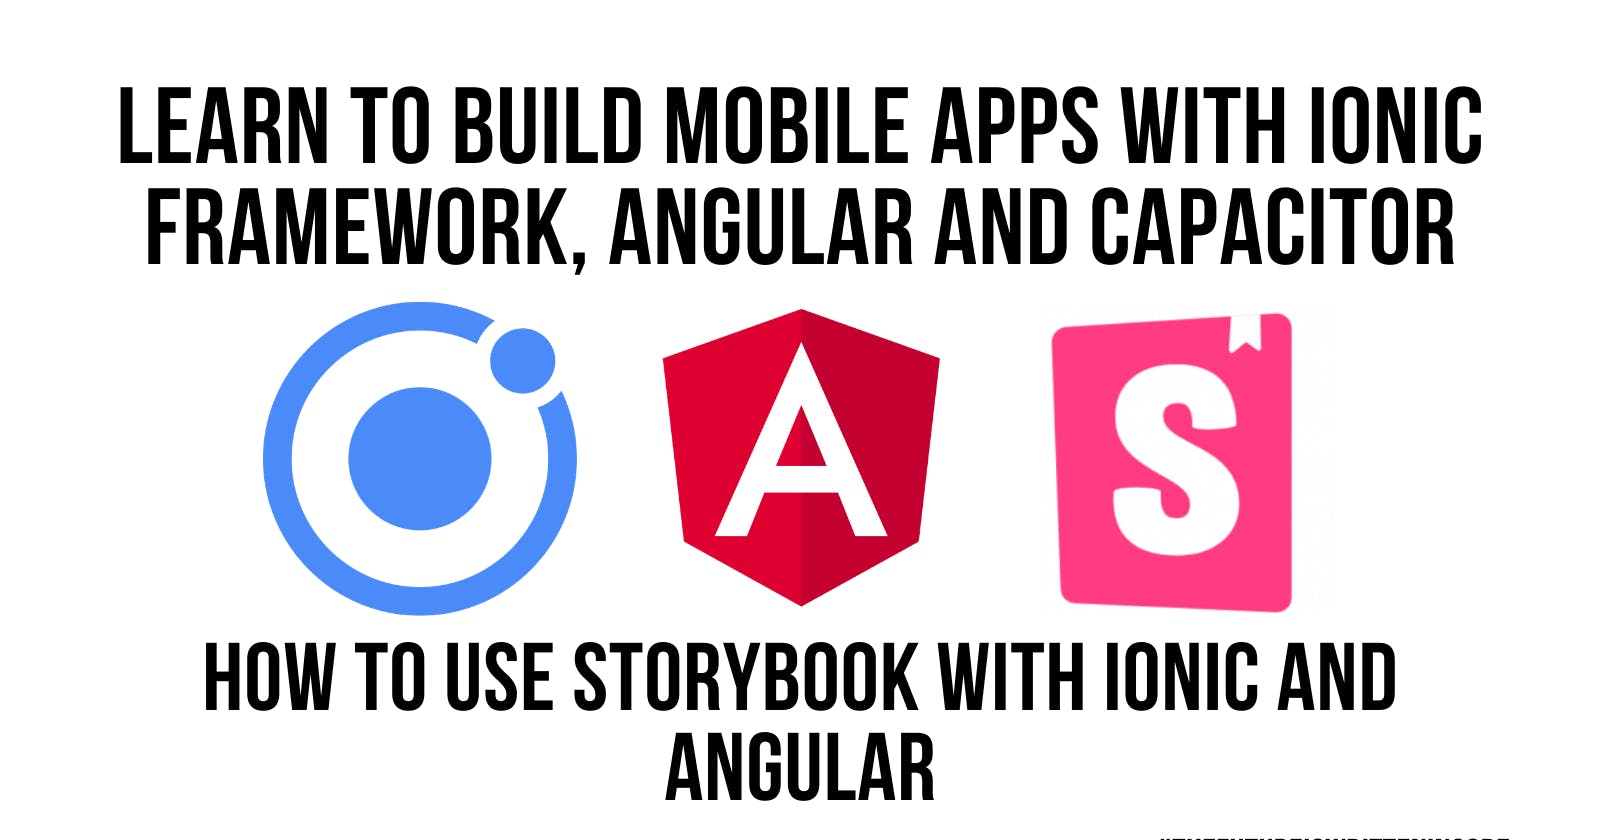 How To Use Storybook with Ionic and Angular